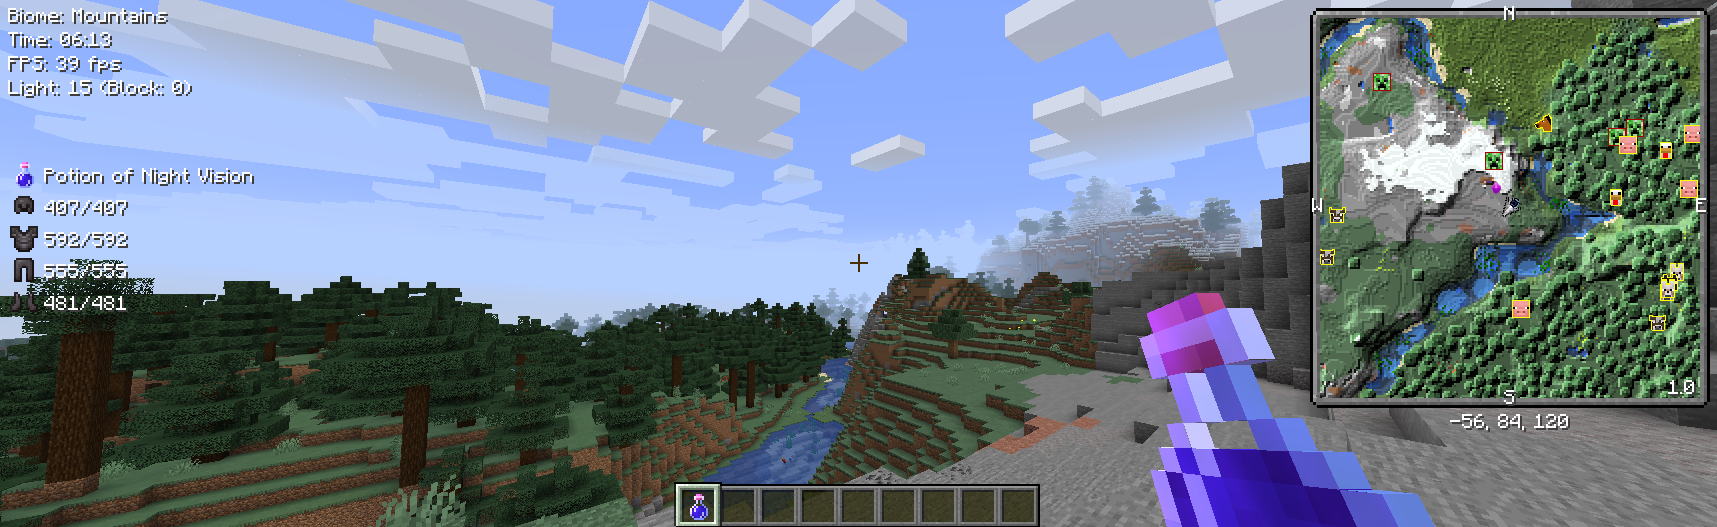 showing current biome minecraft voxel map